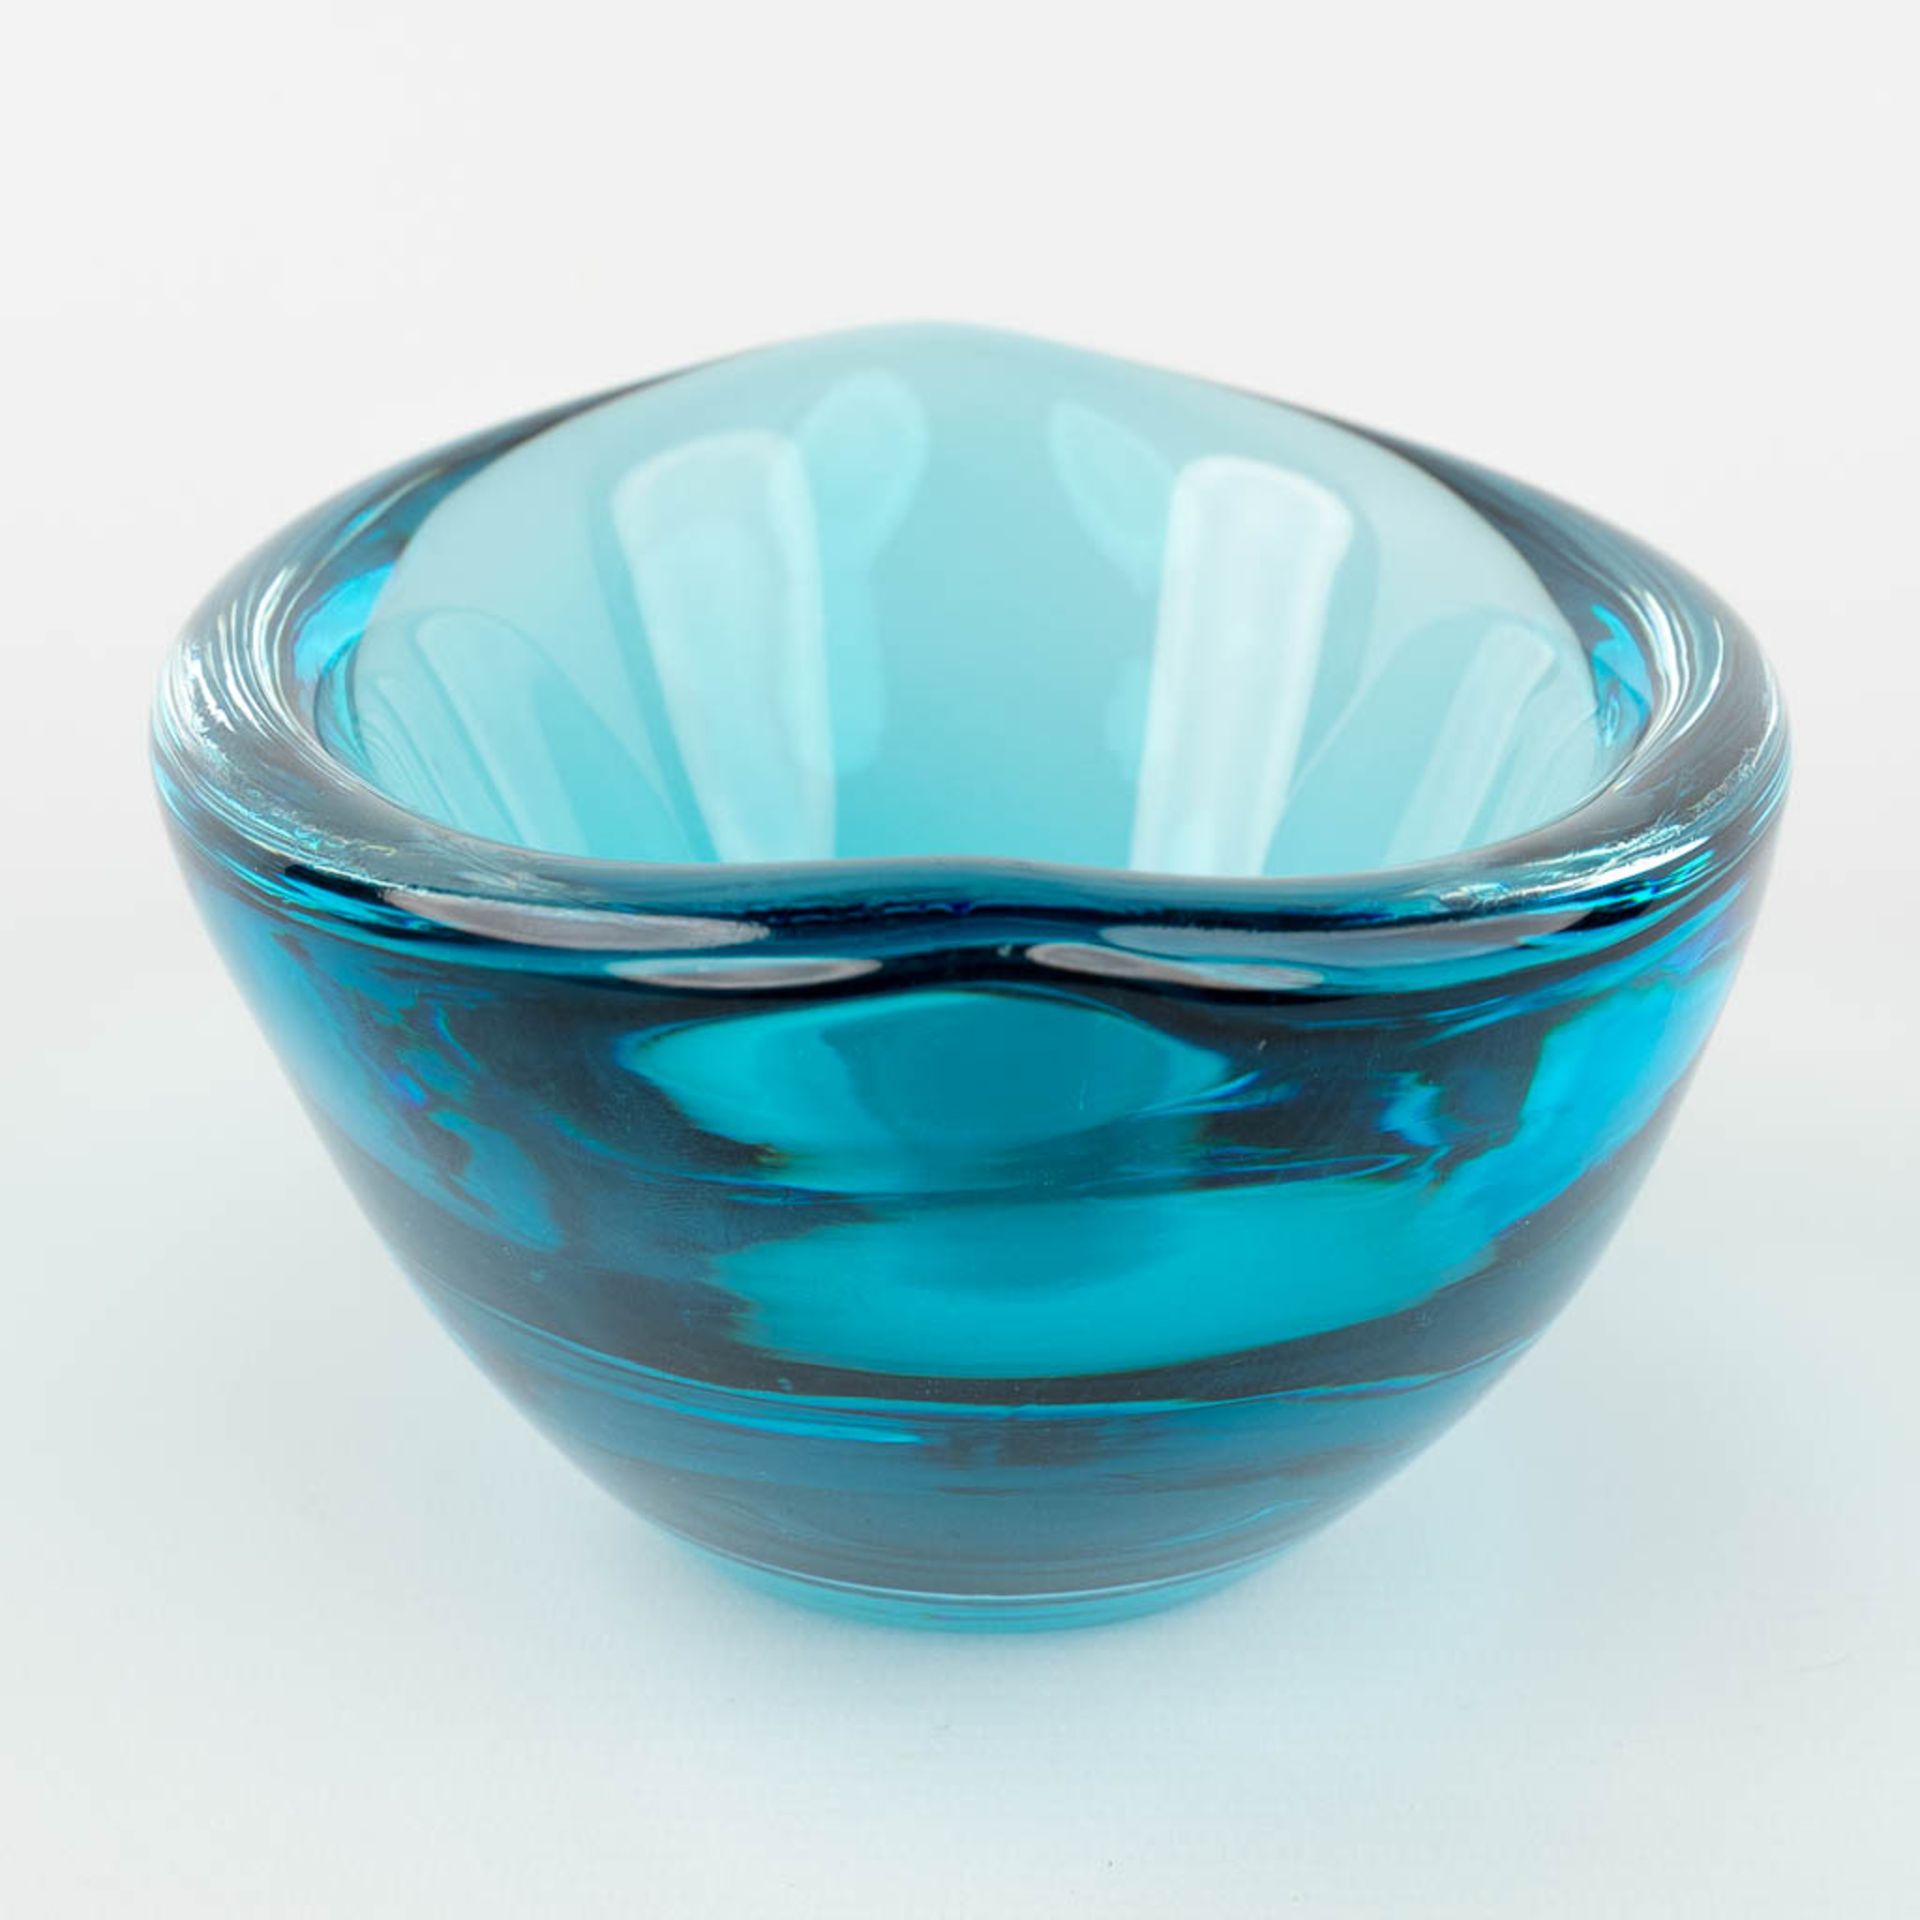 Val Saint Lambert, a bowl on a base, added a bowl in blue glass. (L: 10 x W: 21 x H: 15 cm) - Image 6 of 16